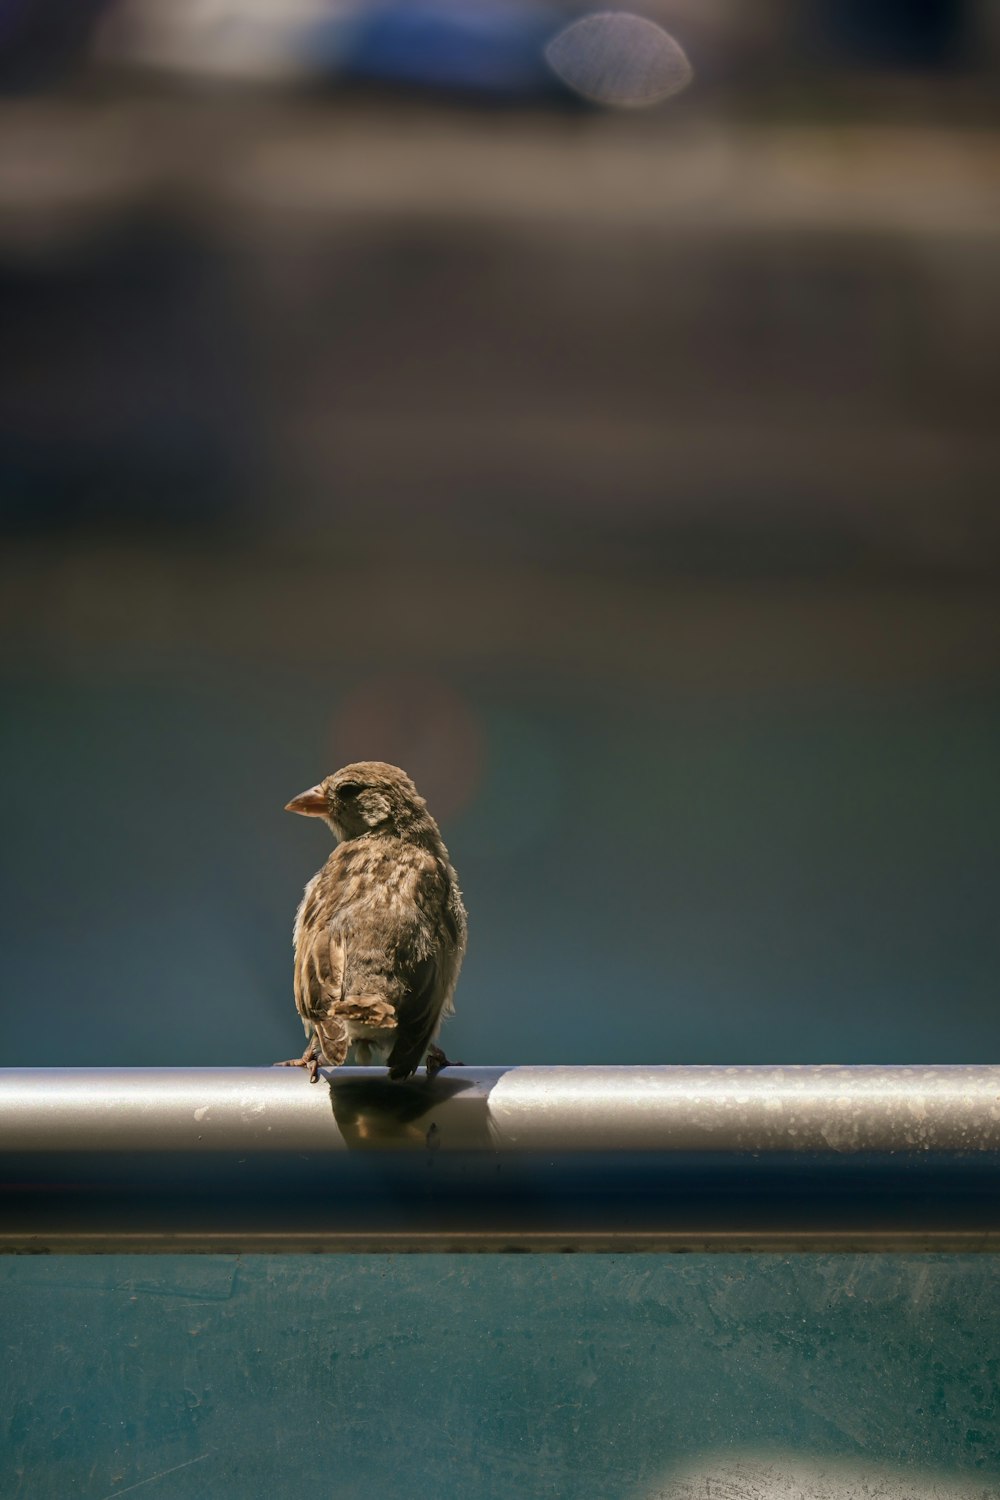 a small bird sitting on top of a metal rail